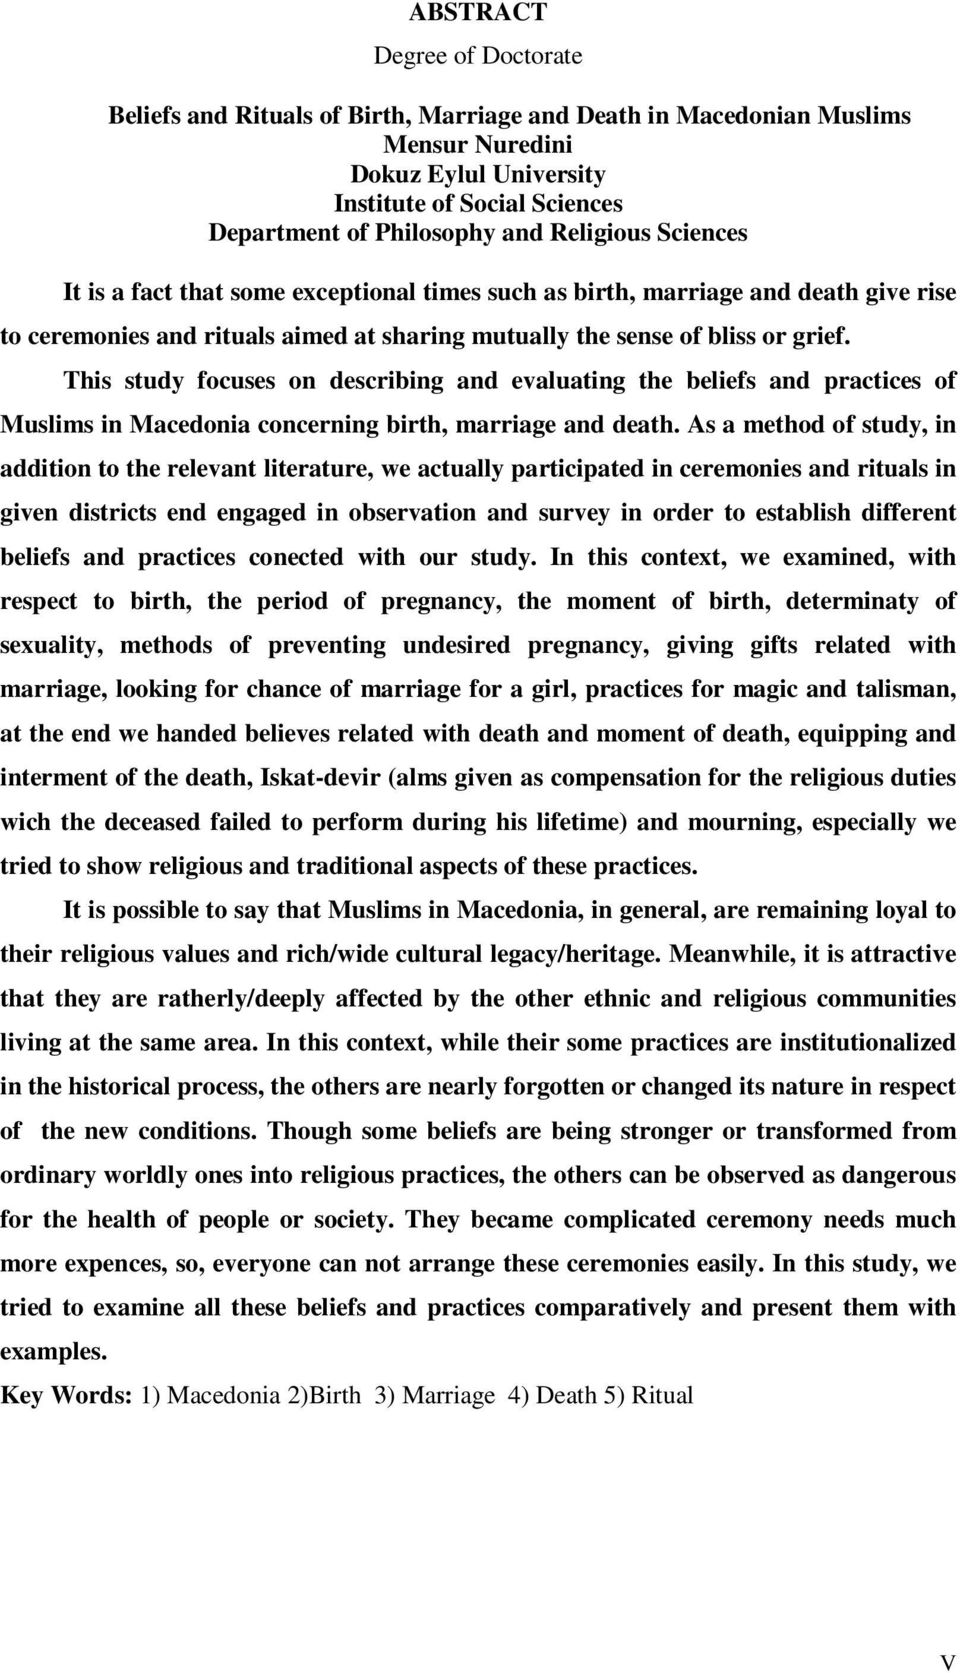 This study focuses on describing and evaluating the beliefs and practices of Muslims in Macedonia concerning birth, marriage and death.